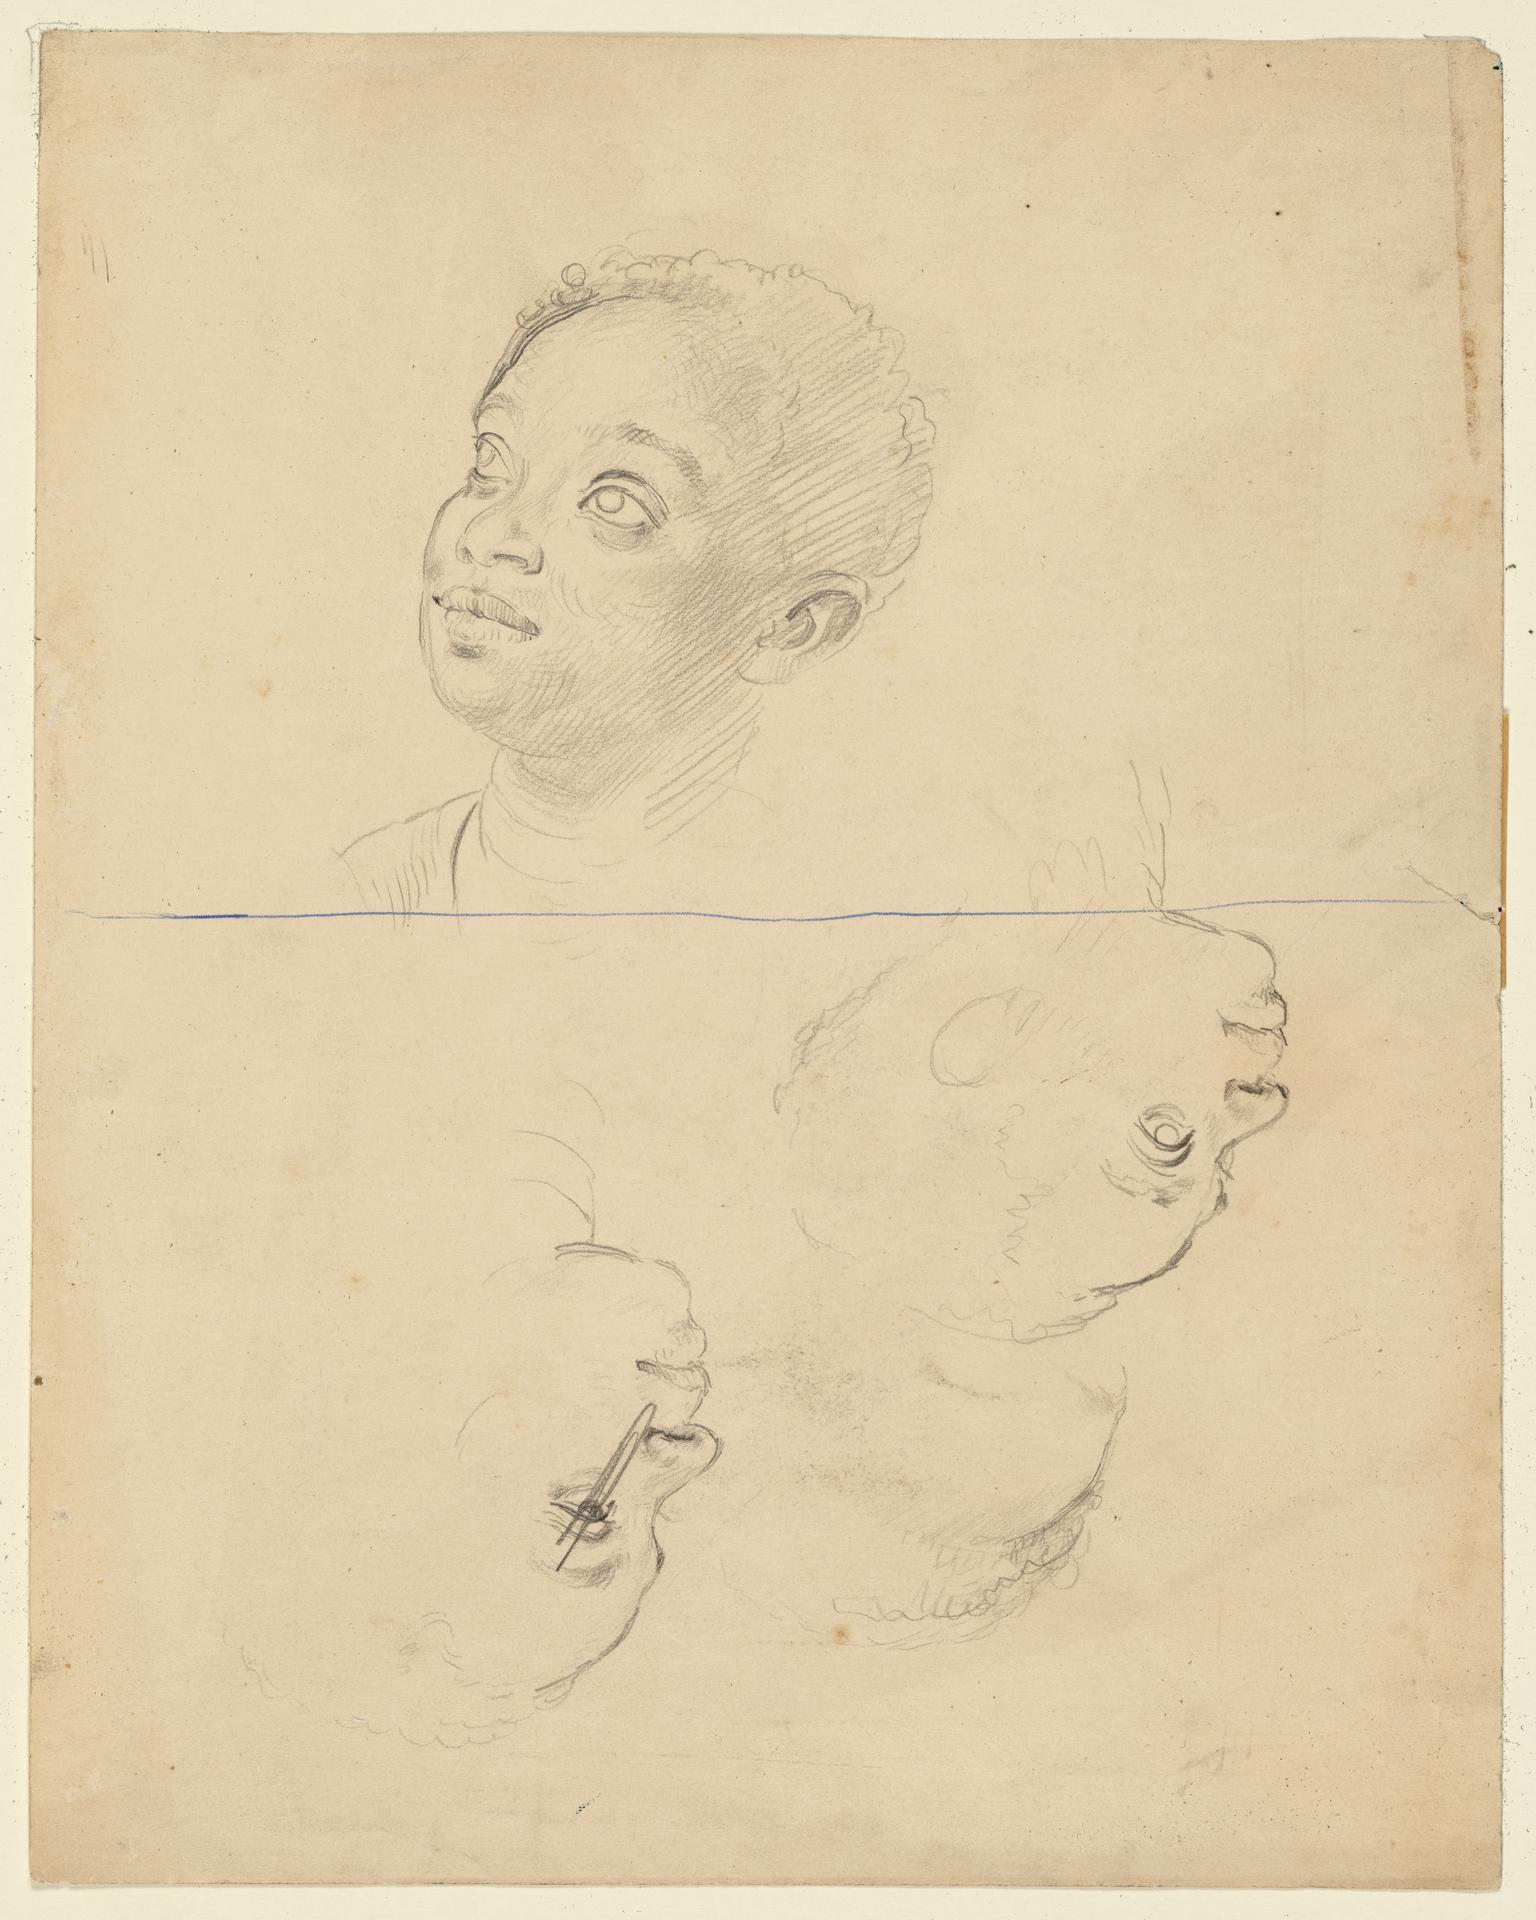 Four Studies of the Head of a Man